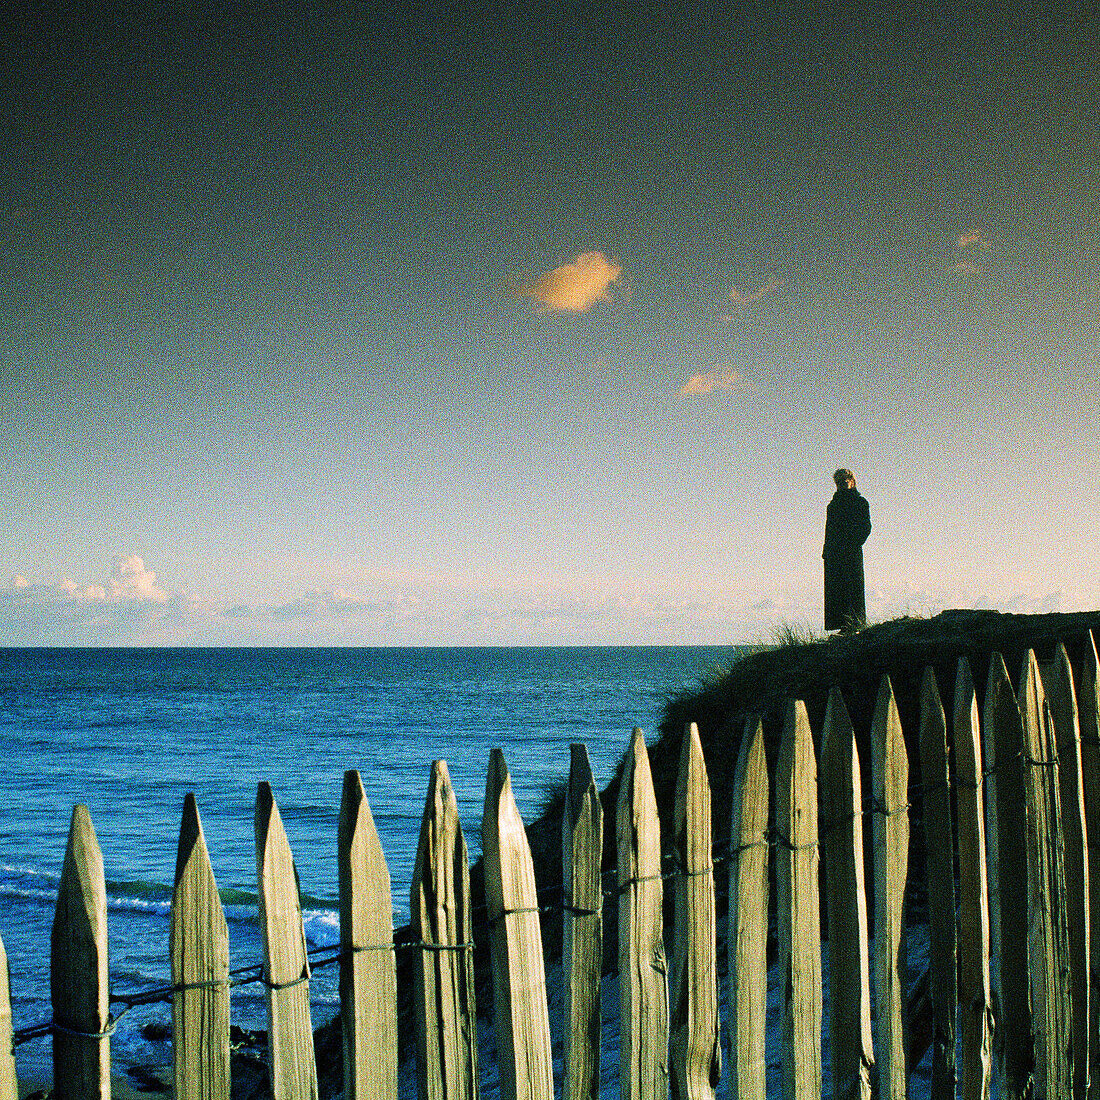 Person standing next to sea, fence in foreground